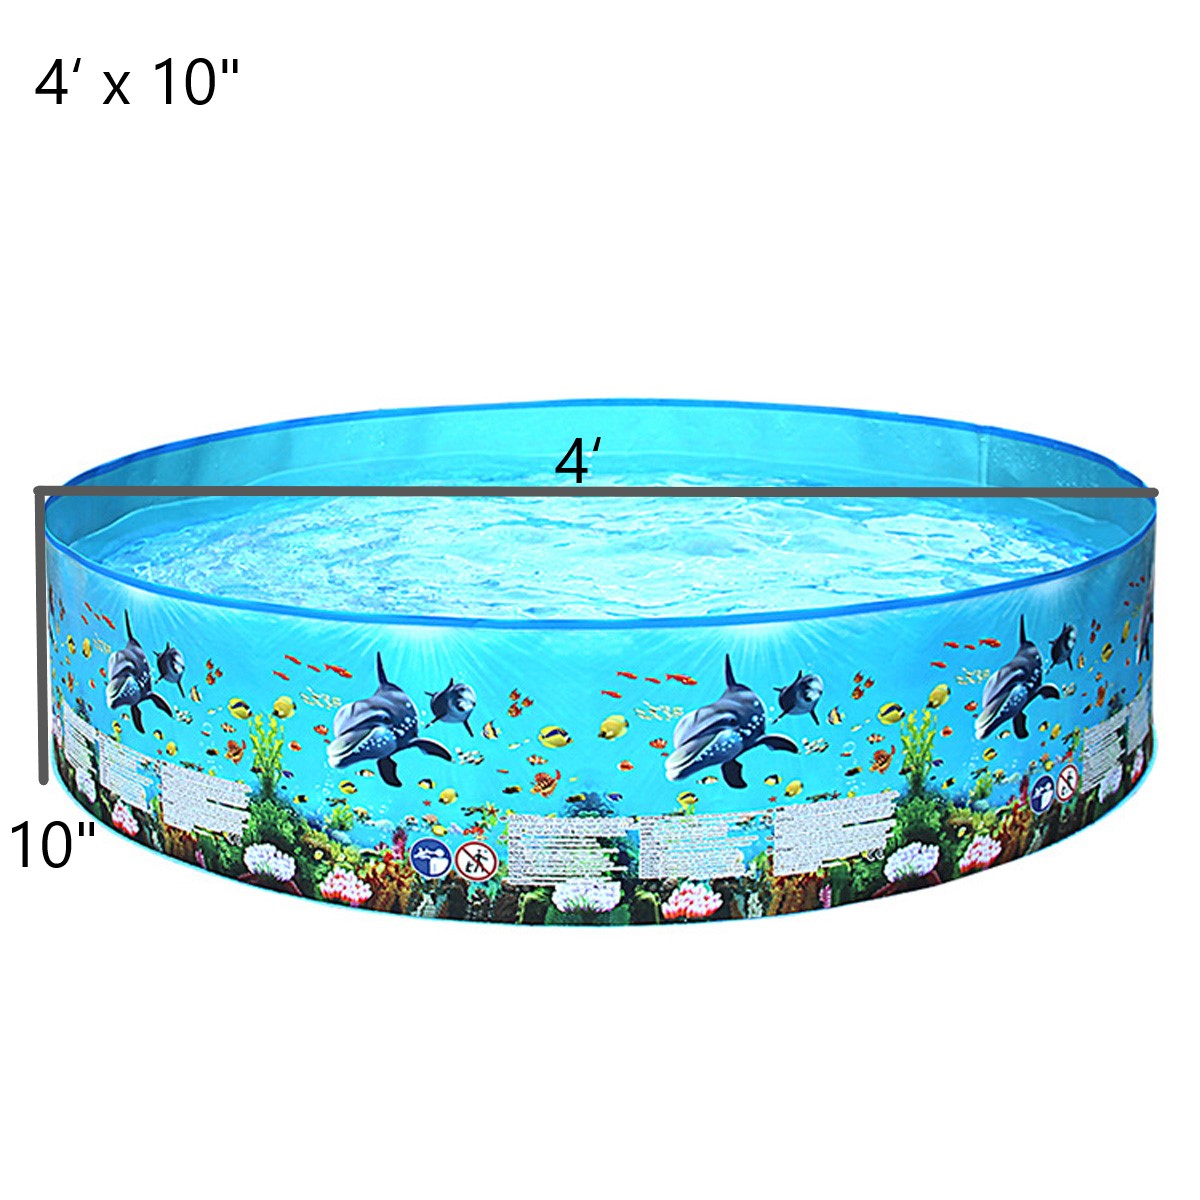 4' x 10" inch Pool Family Paddling Pool Swimming Pool, Garden Round Inflatable Baby Swimming Pool, Portable Inflatable Child / Children Pool - image 2 of 6